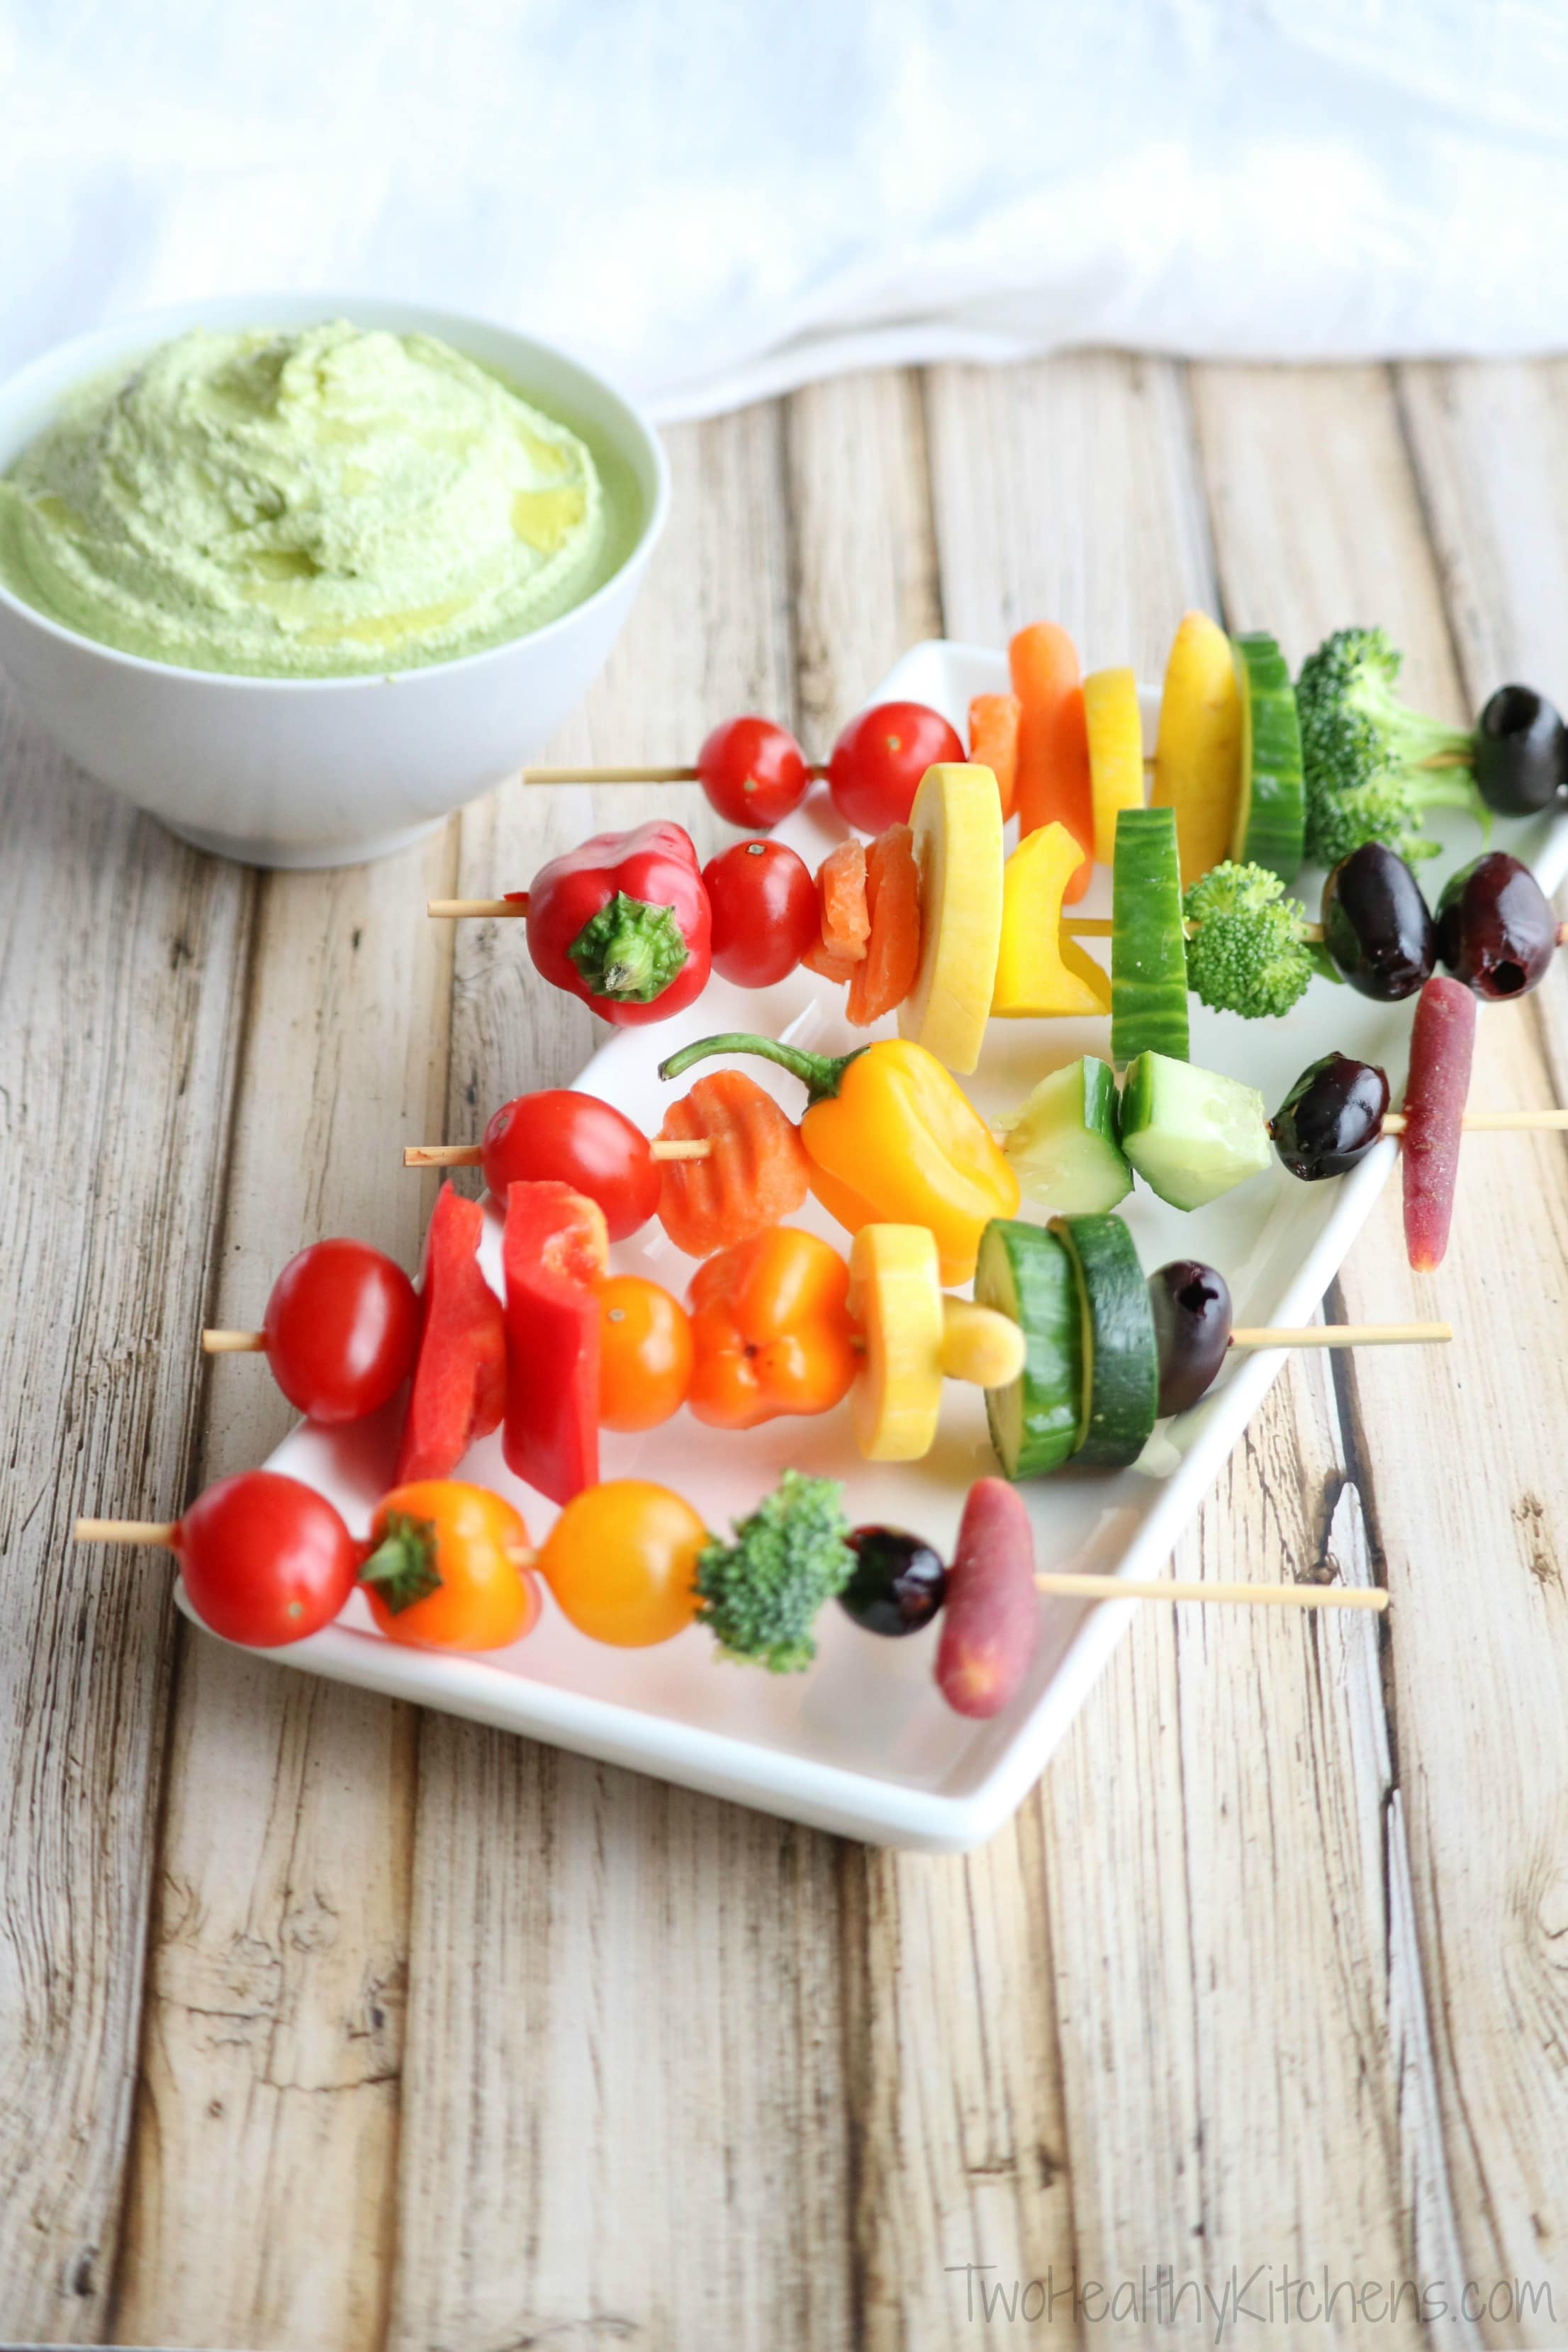 Skewered veggies in rainbow-colored rows on serving plate with green vegetable dip in bowl in background.